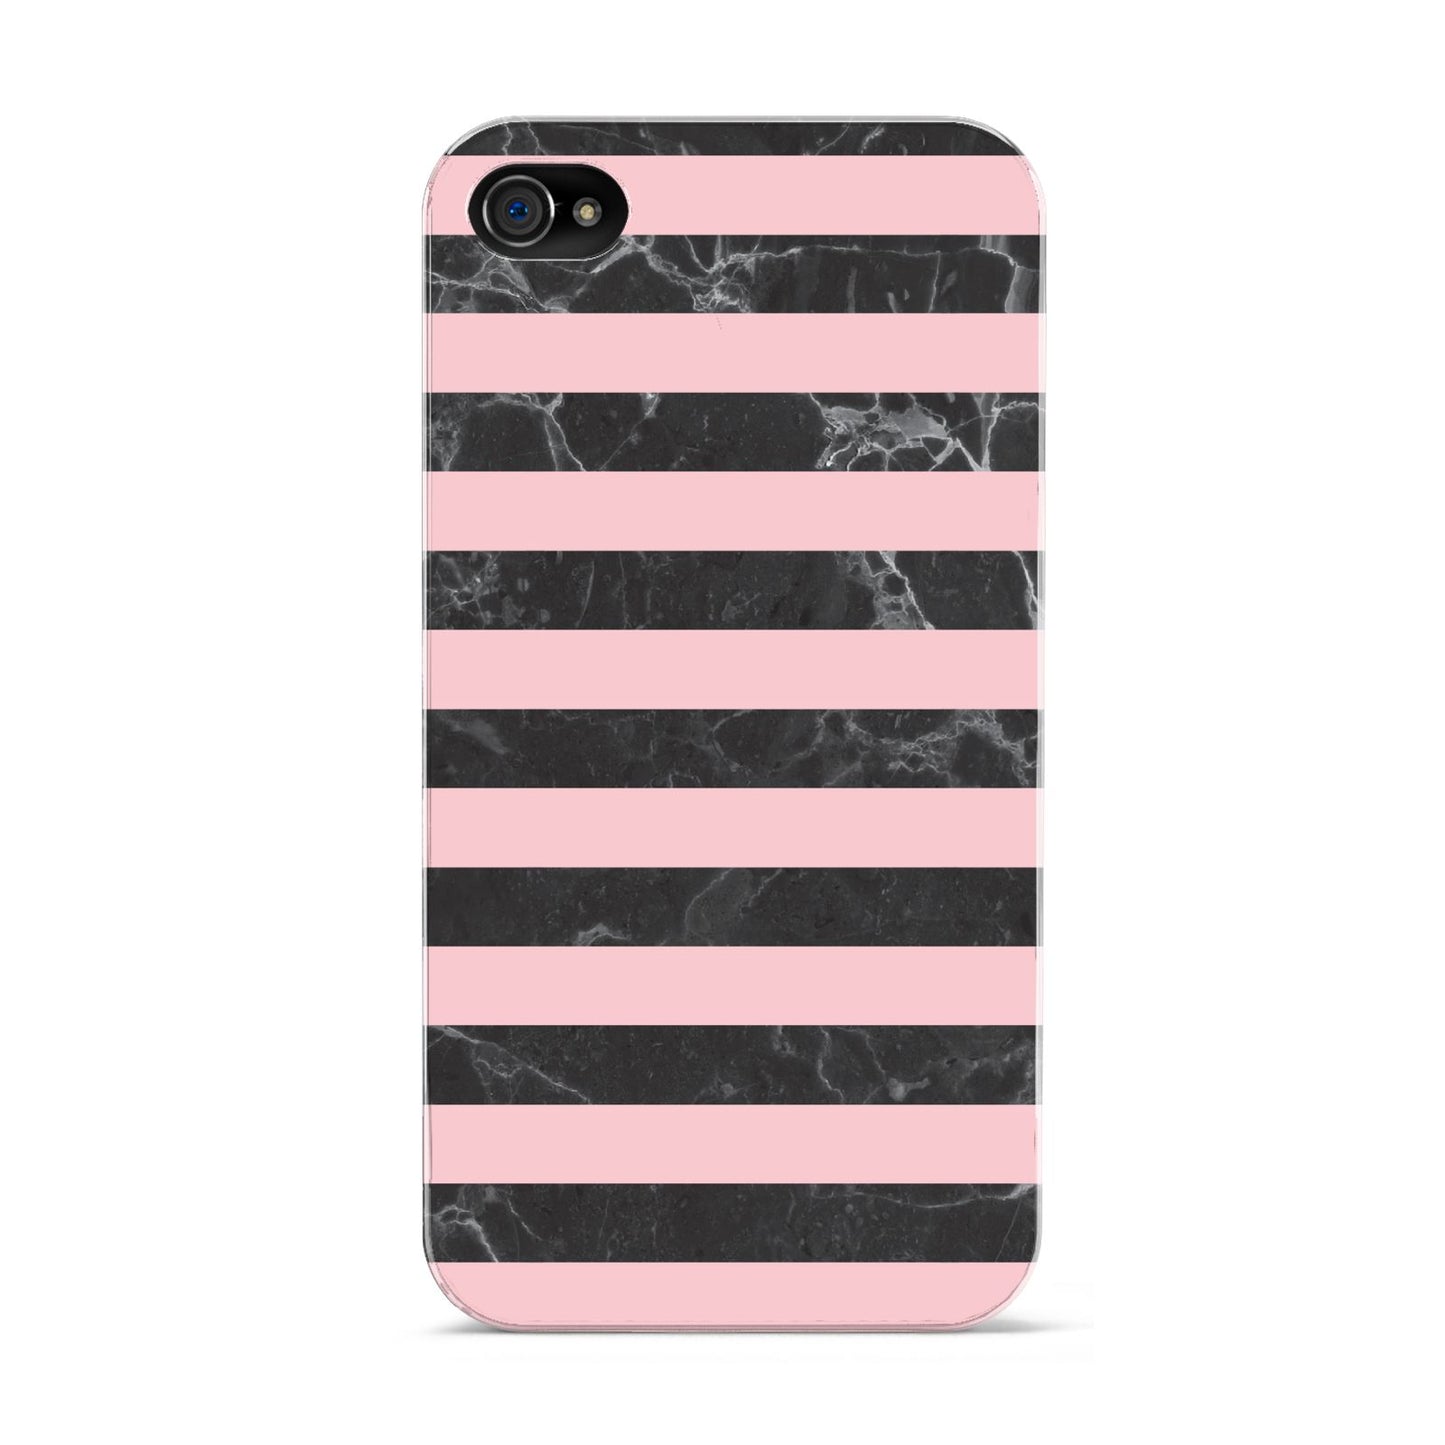 Marble Black Pink Striped Apple iPhone 4s Case